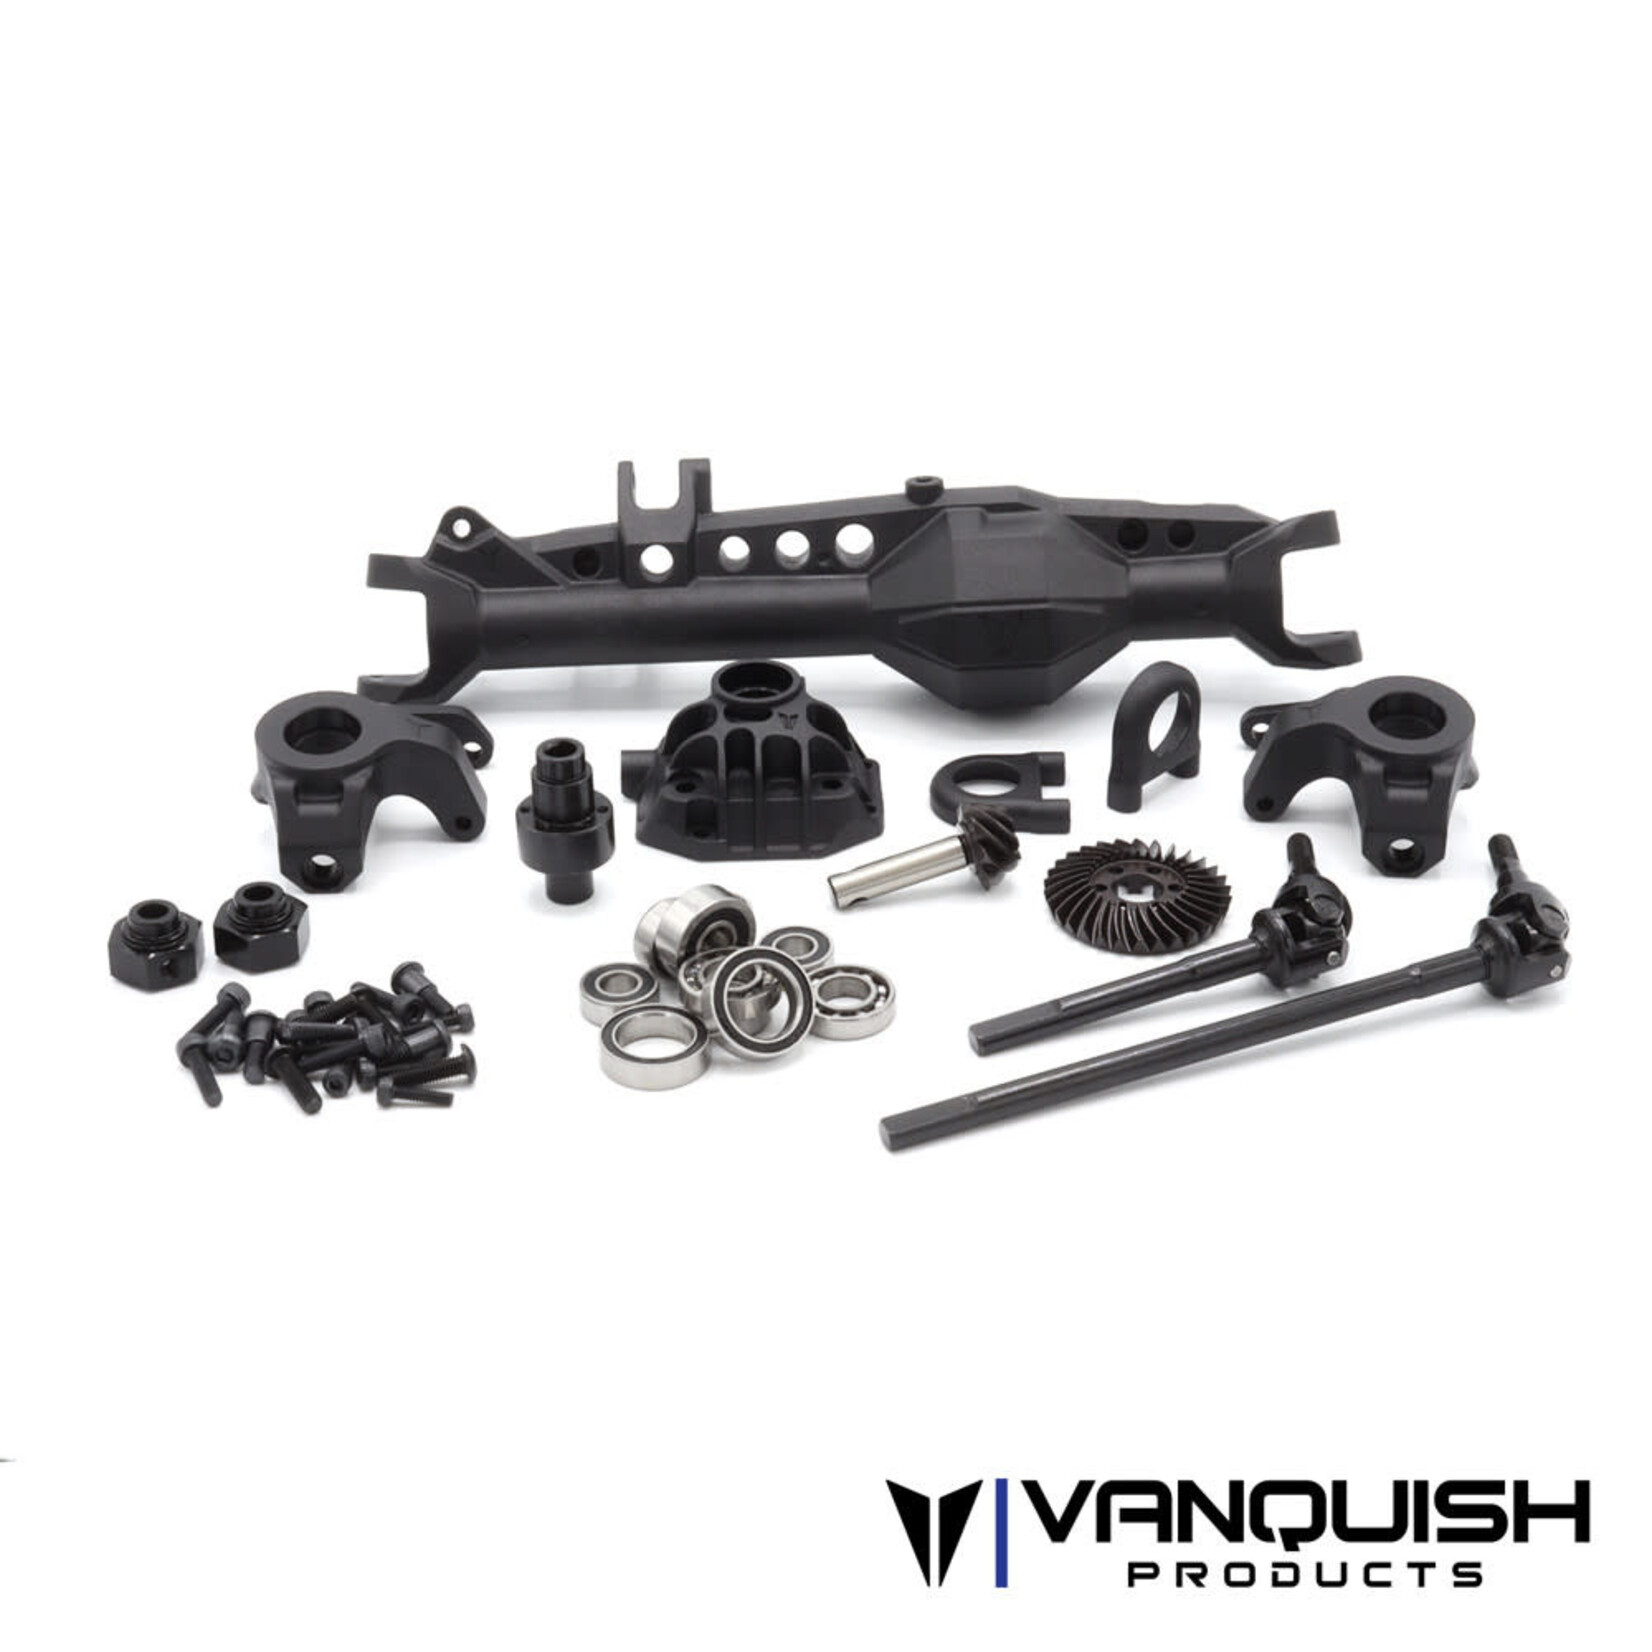 Vanquish Products Vanquish Products F10 Straight Front Axle Set